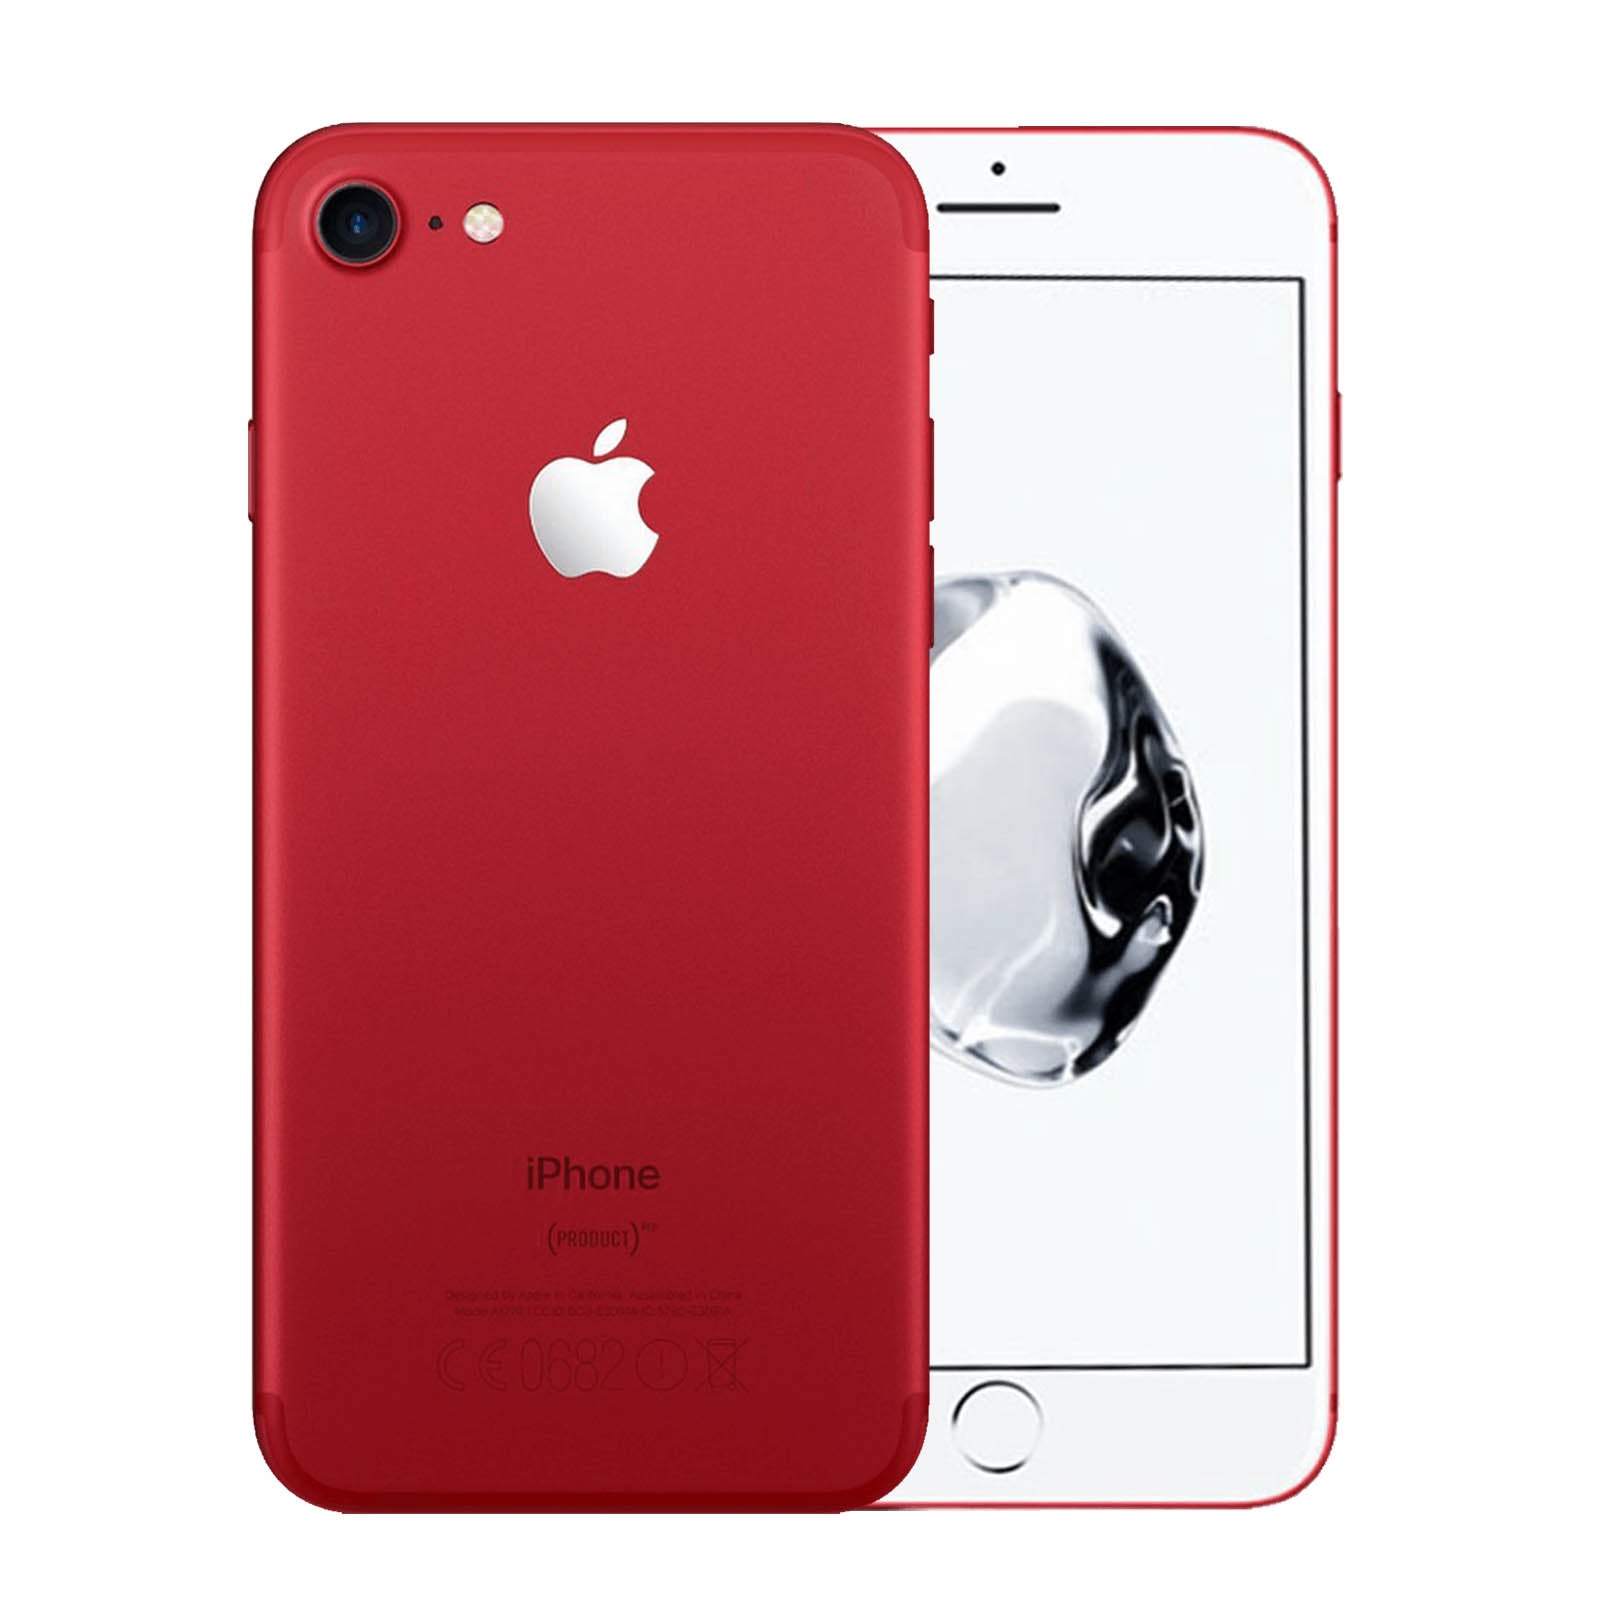 Apple iPhone 7 128GB Product Red Very Good- Unlocked